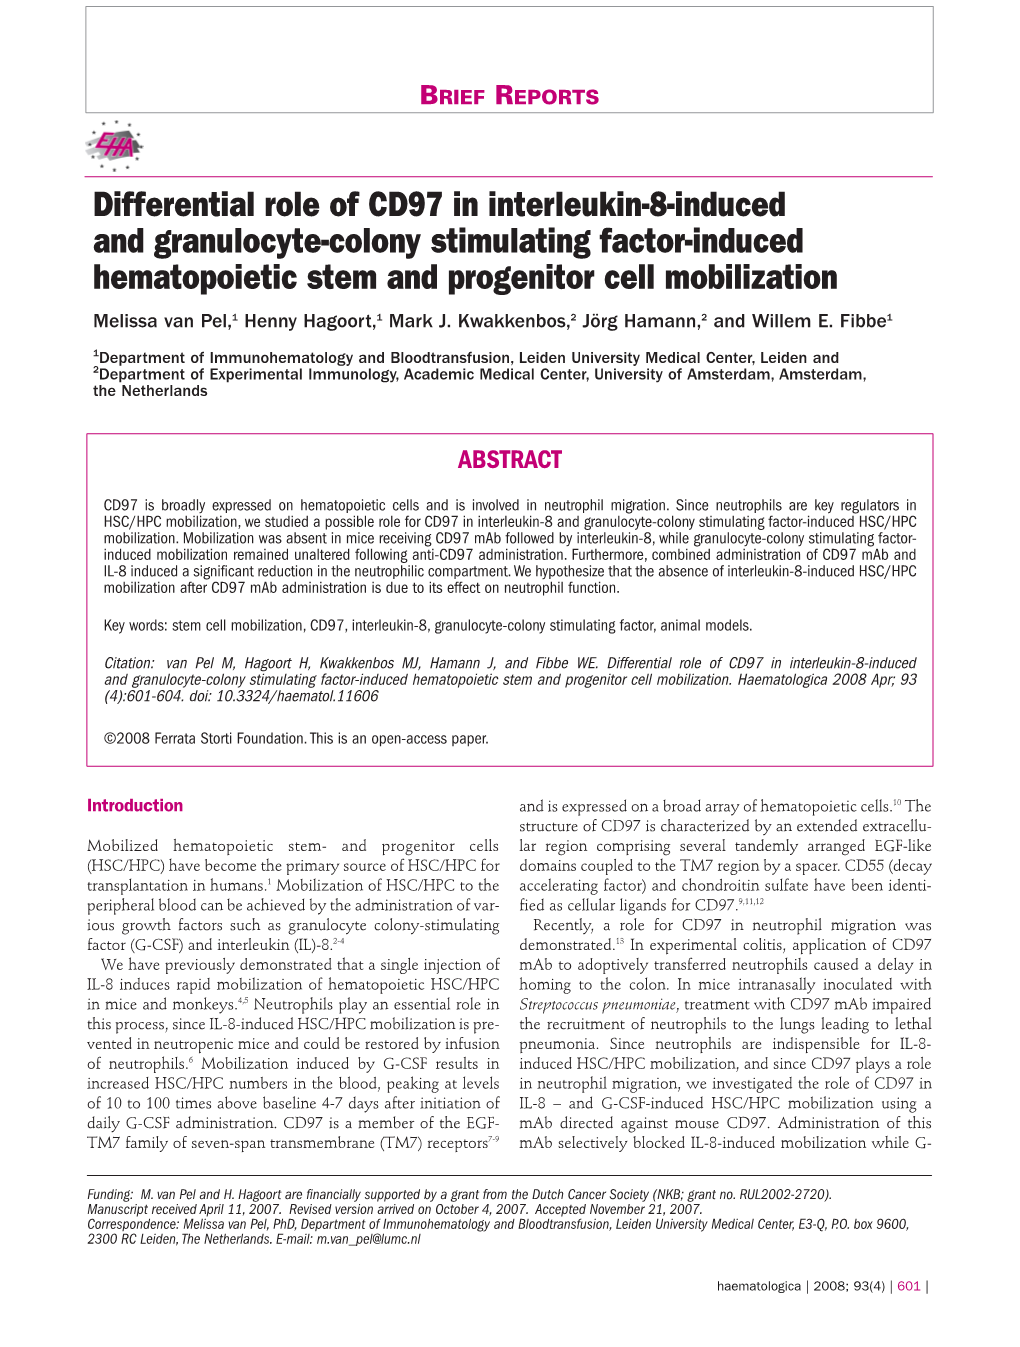 Differential Role of CD97 in Interleukin-8-Induced and Granulocyte-Colony Stimulating Factor-Induced Hematopoietic Stem and Progenitor Cell Mobilization